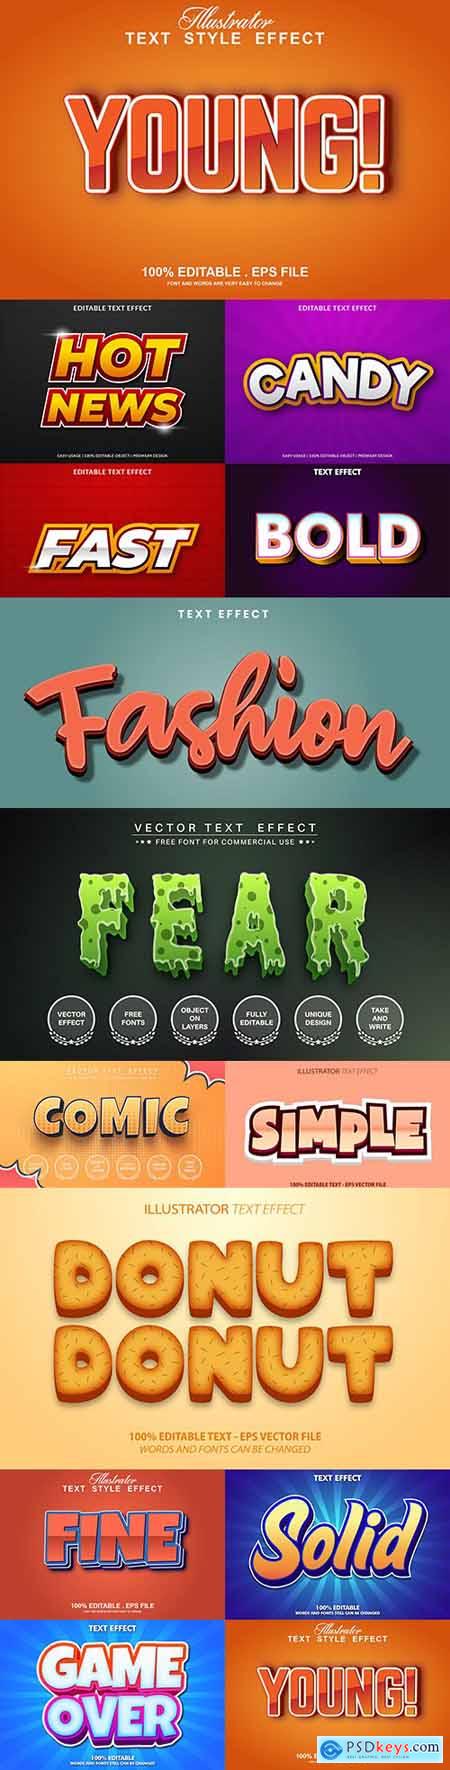 Editable font and 3d effect text design collection illustration 30